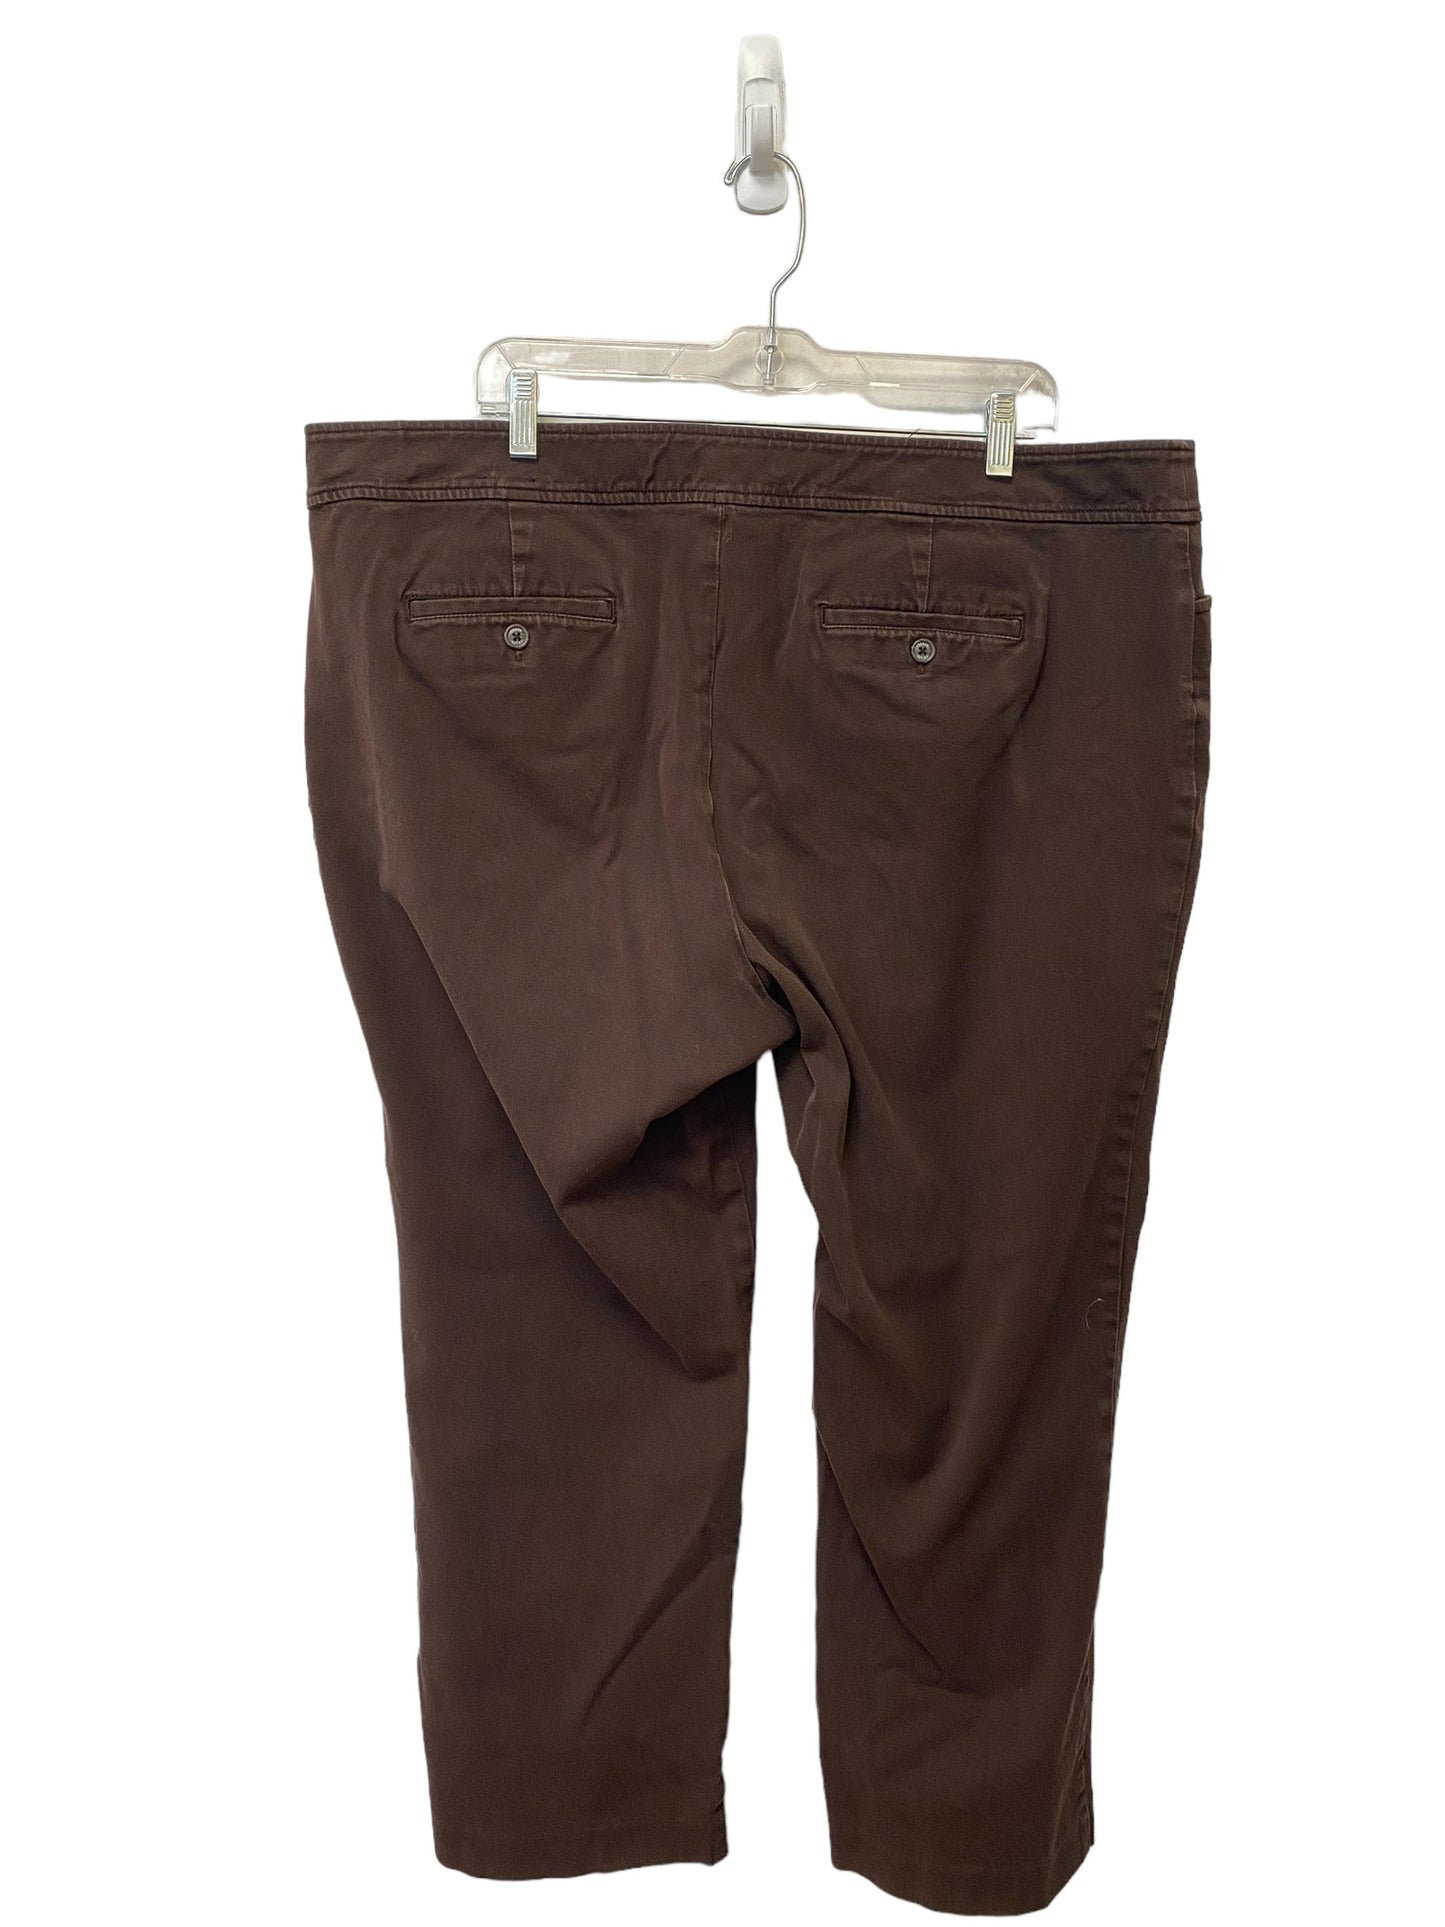 Pants Ankle By Chaps  Size: 20